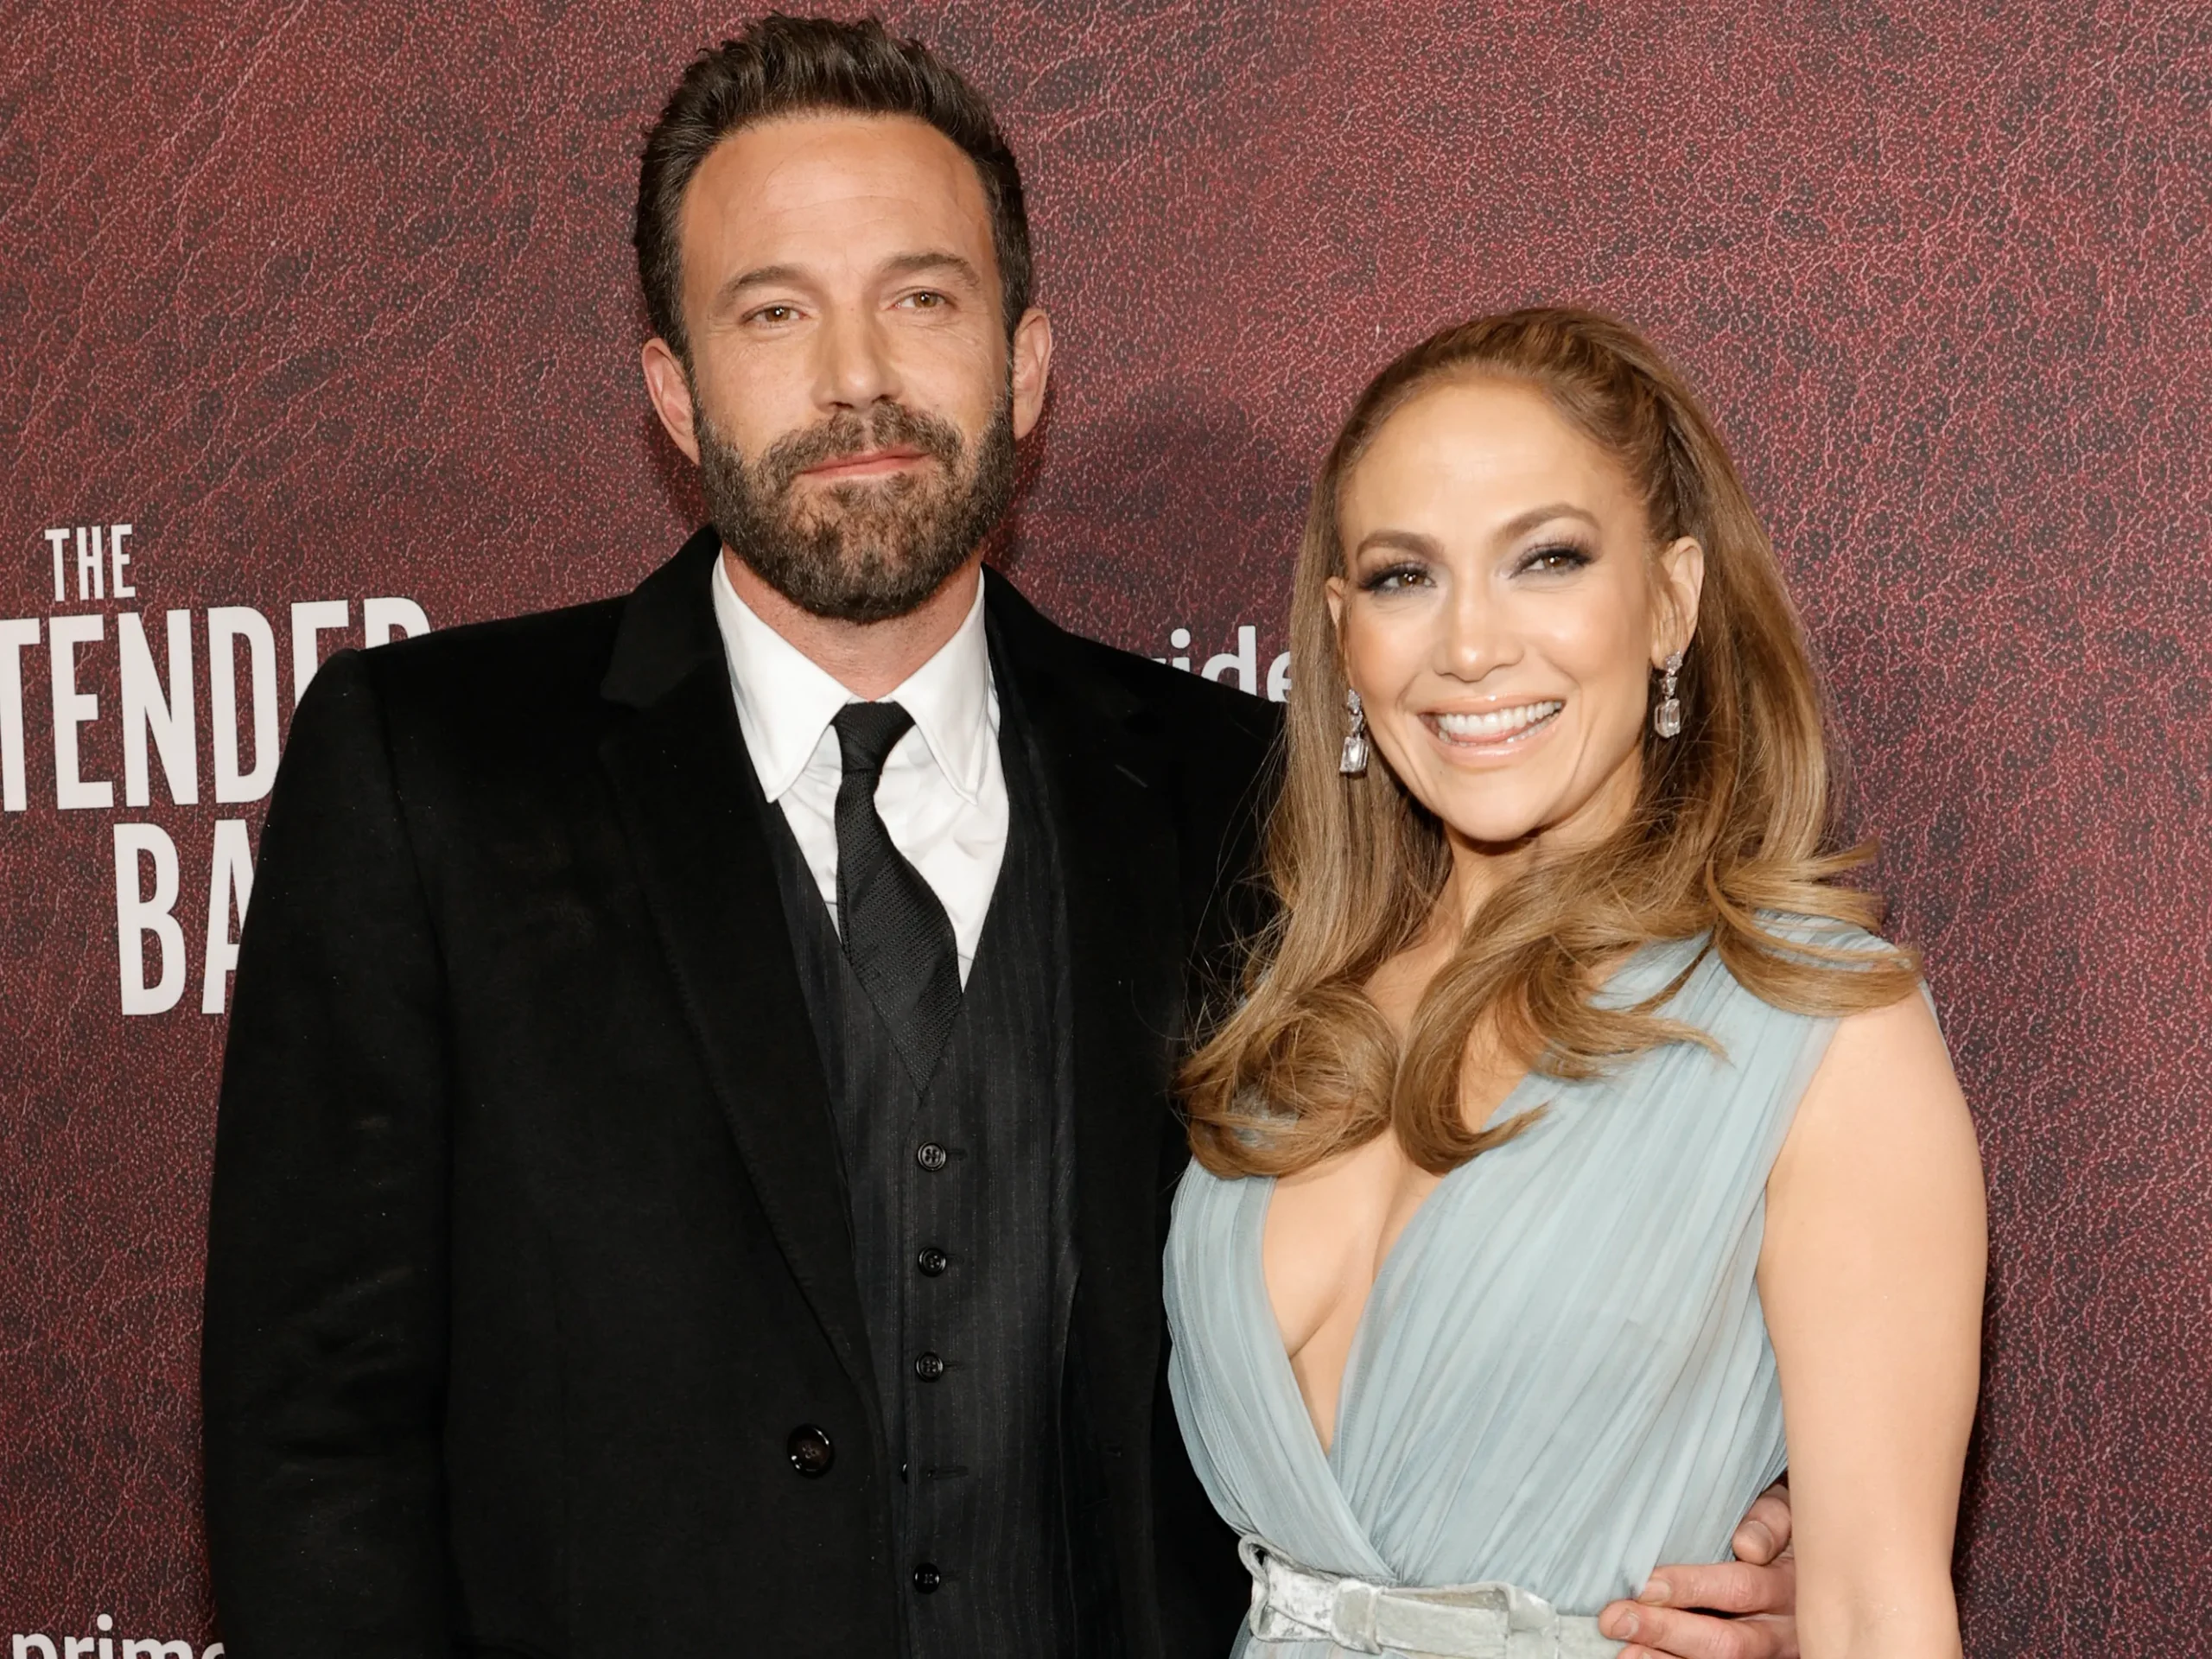 Ben Affleck and JLo: A Power Couple